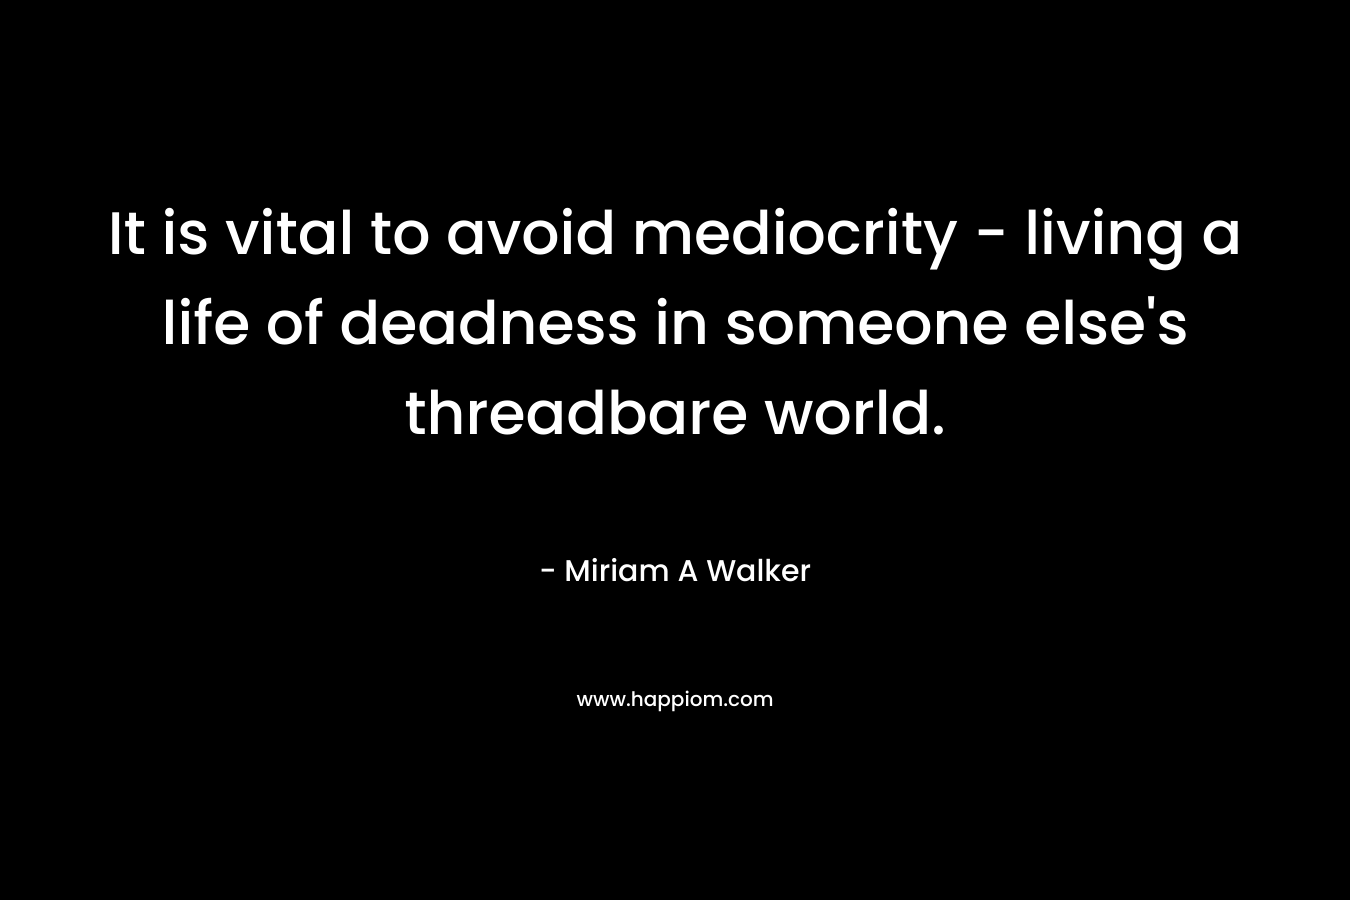 It is vital to avoid mediocrity – living a life of deadness in someone else’s threadbare world. – Miriam A Walker